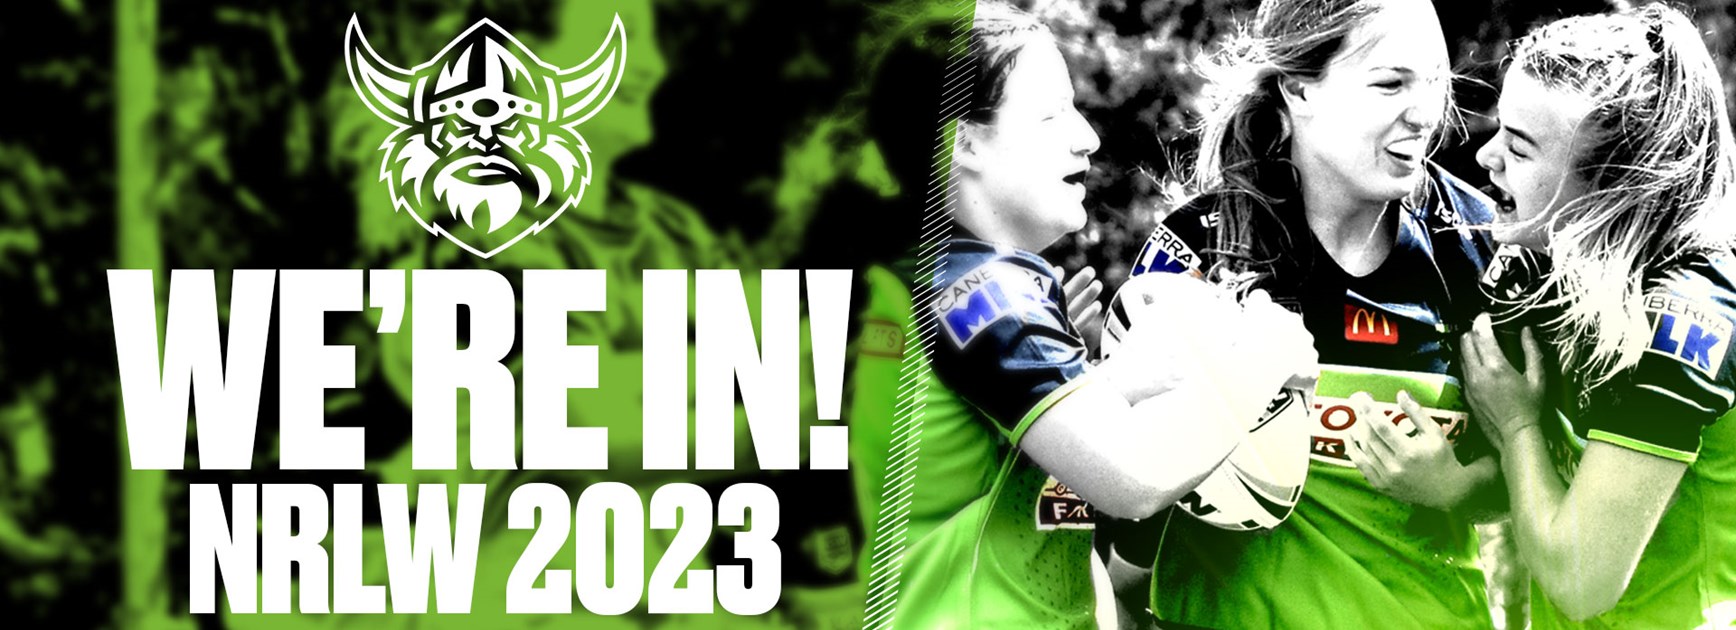 Raiders to join NRLW in 2023